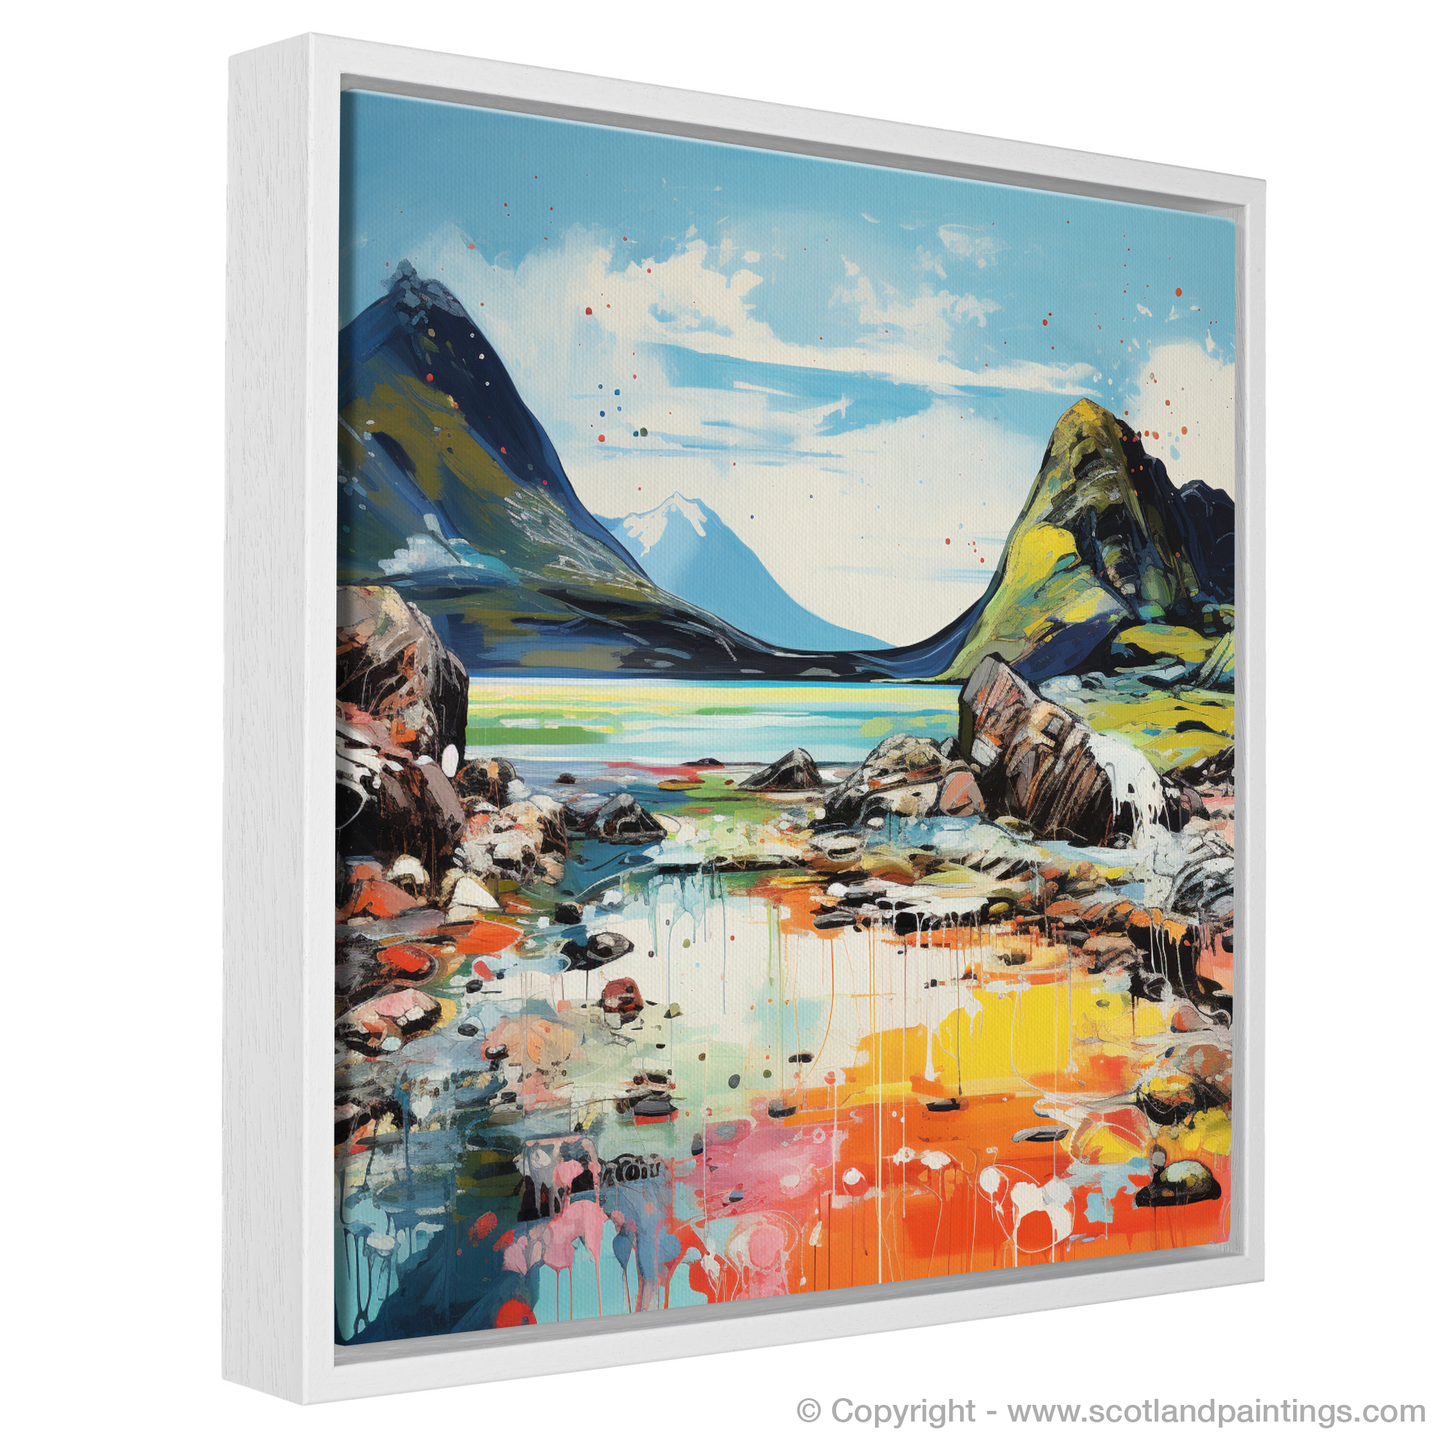 Painting and Art Print of Isle of Rum, Inner Hebrides in summer entitled "Vibrant Summer Escape: Isle of Rum Abstract".